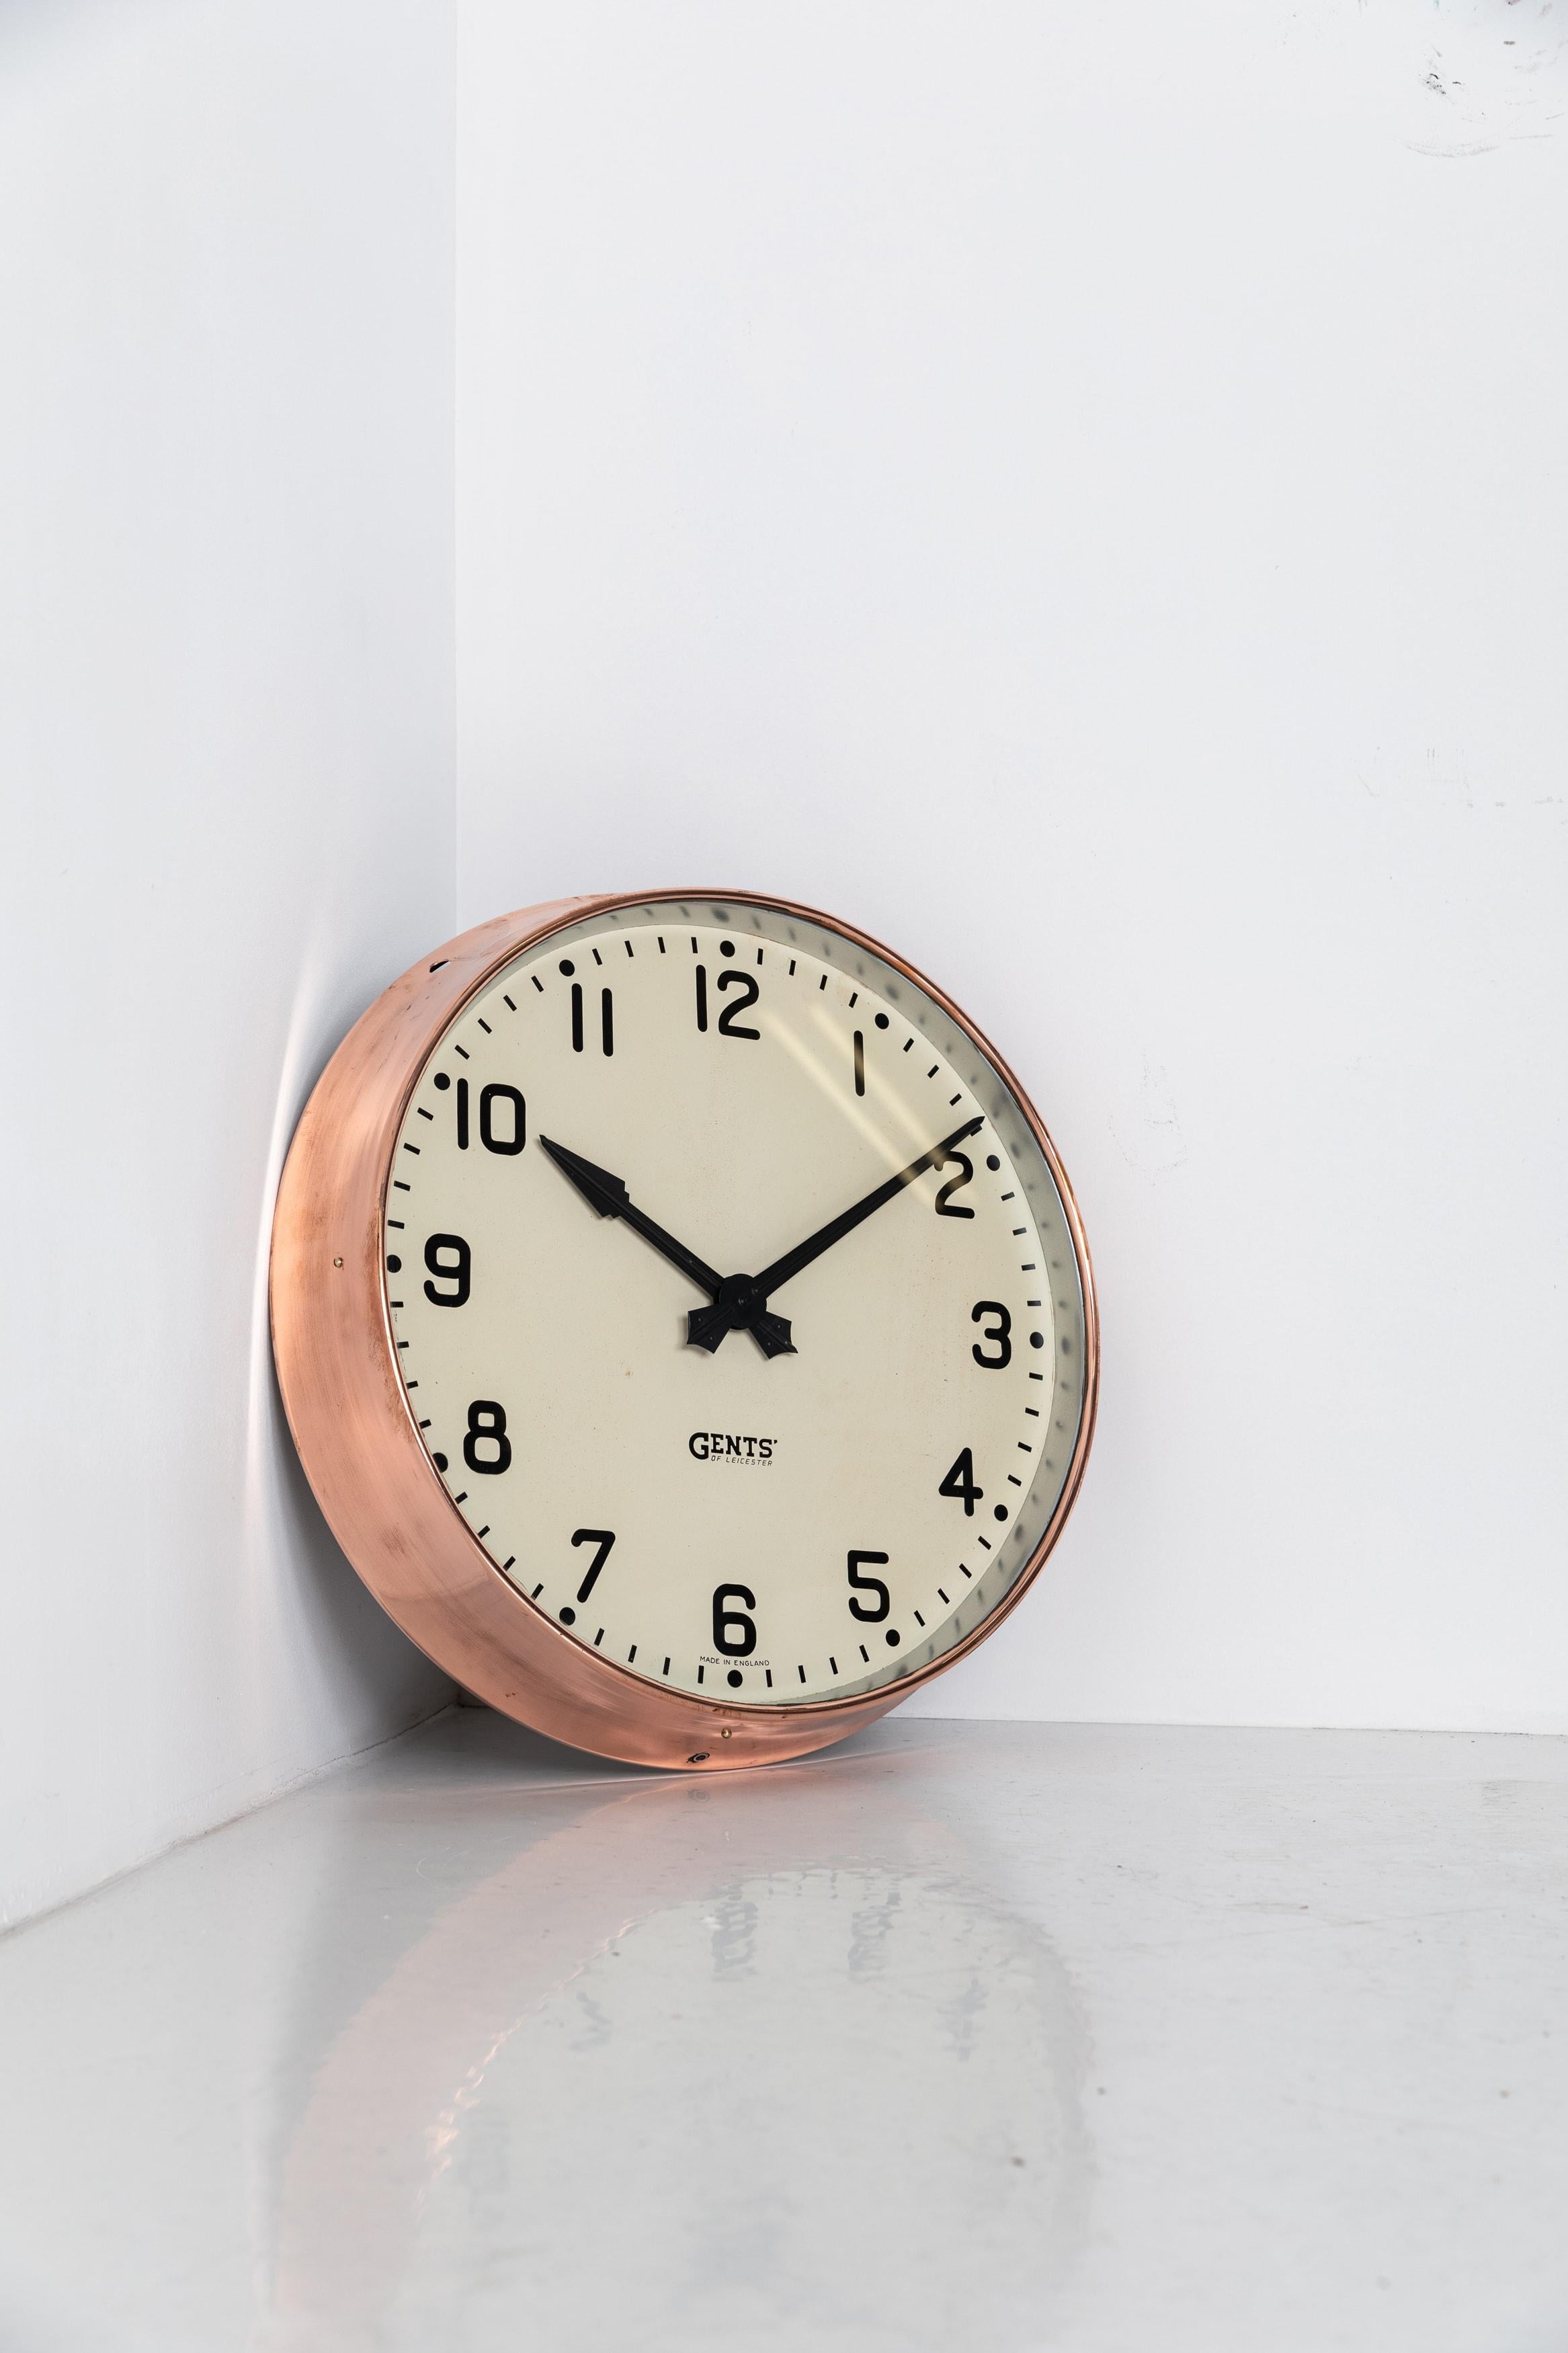 English Vintage Industrial Copper Gents of Leicester Factory Railway Wall Clock c. 1930